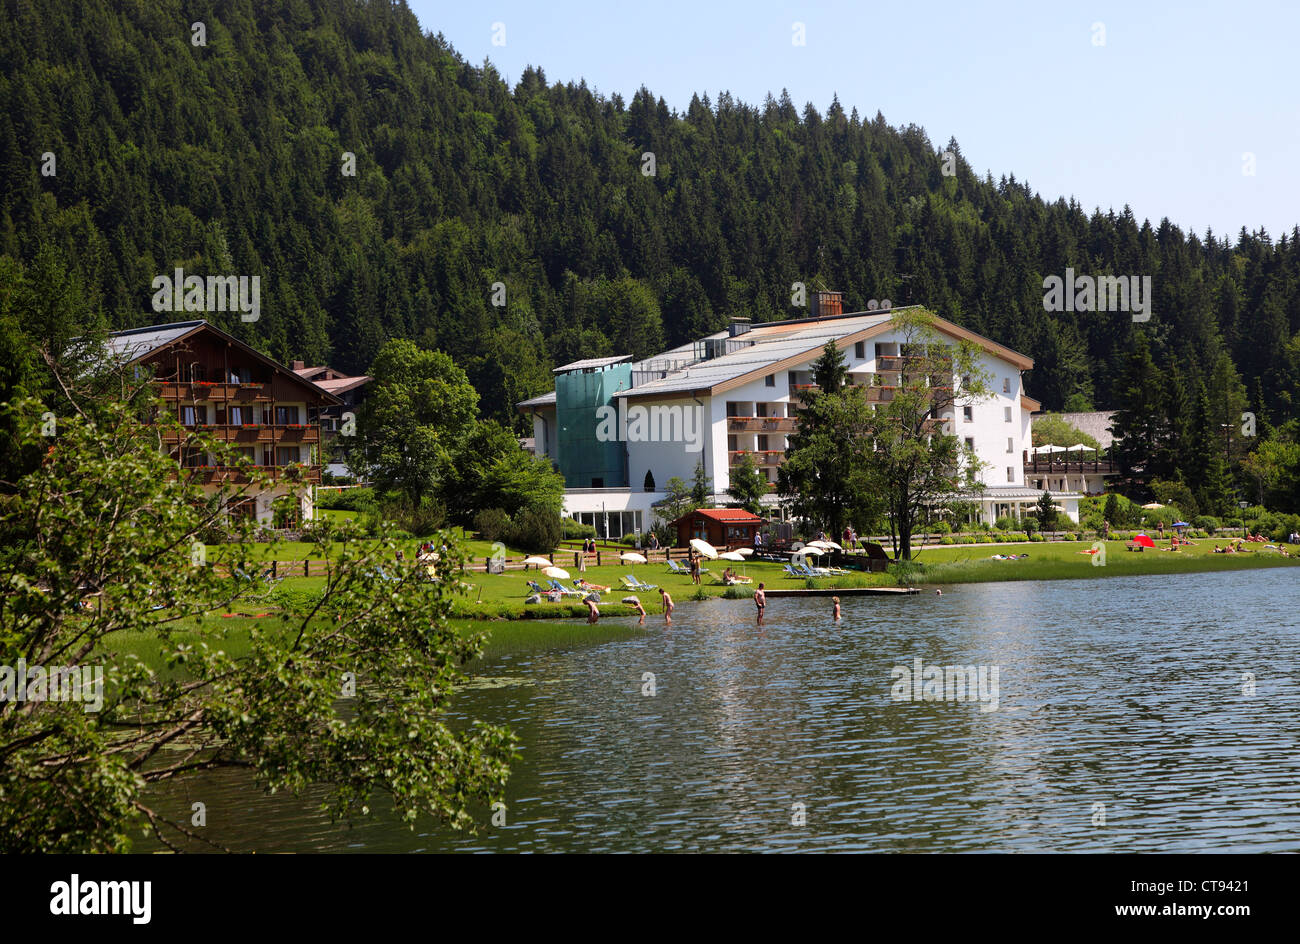 Spitzingsee  lake. An alpine lake in the Bavarian alps. Stock Photo